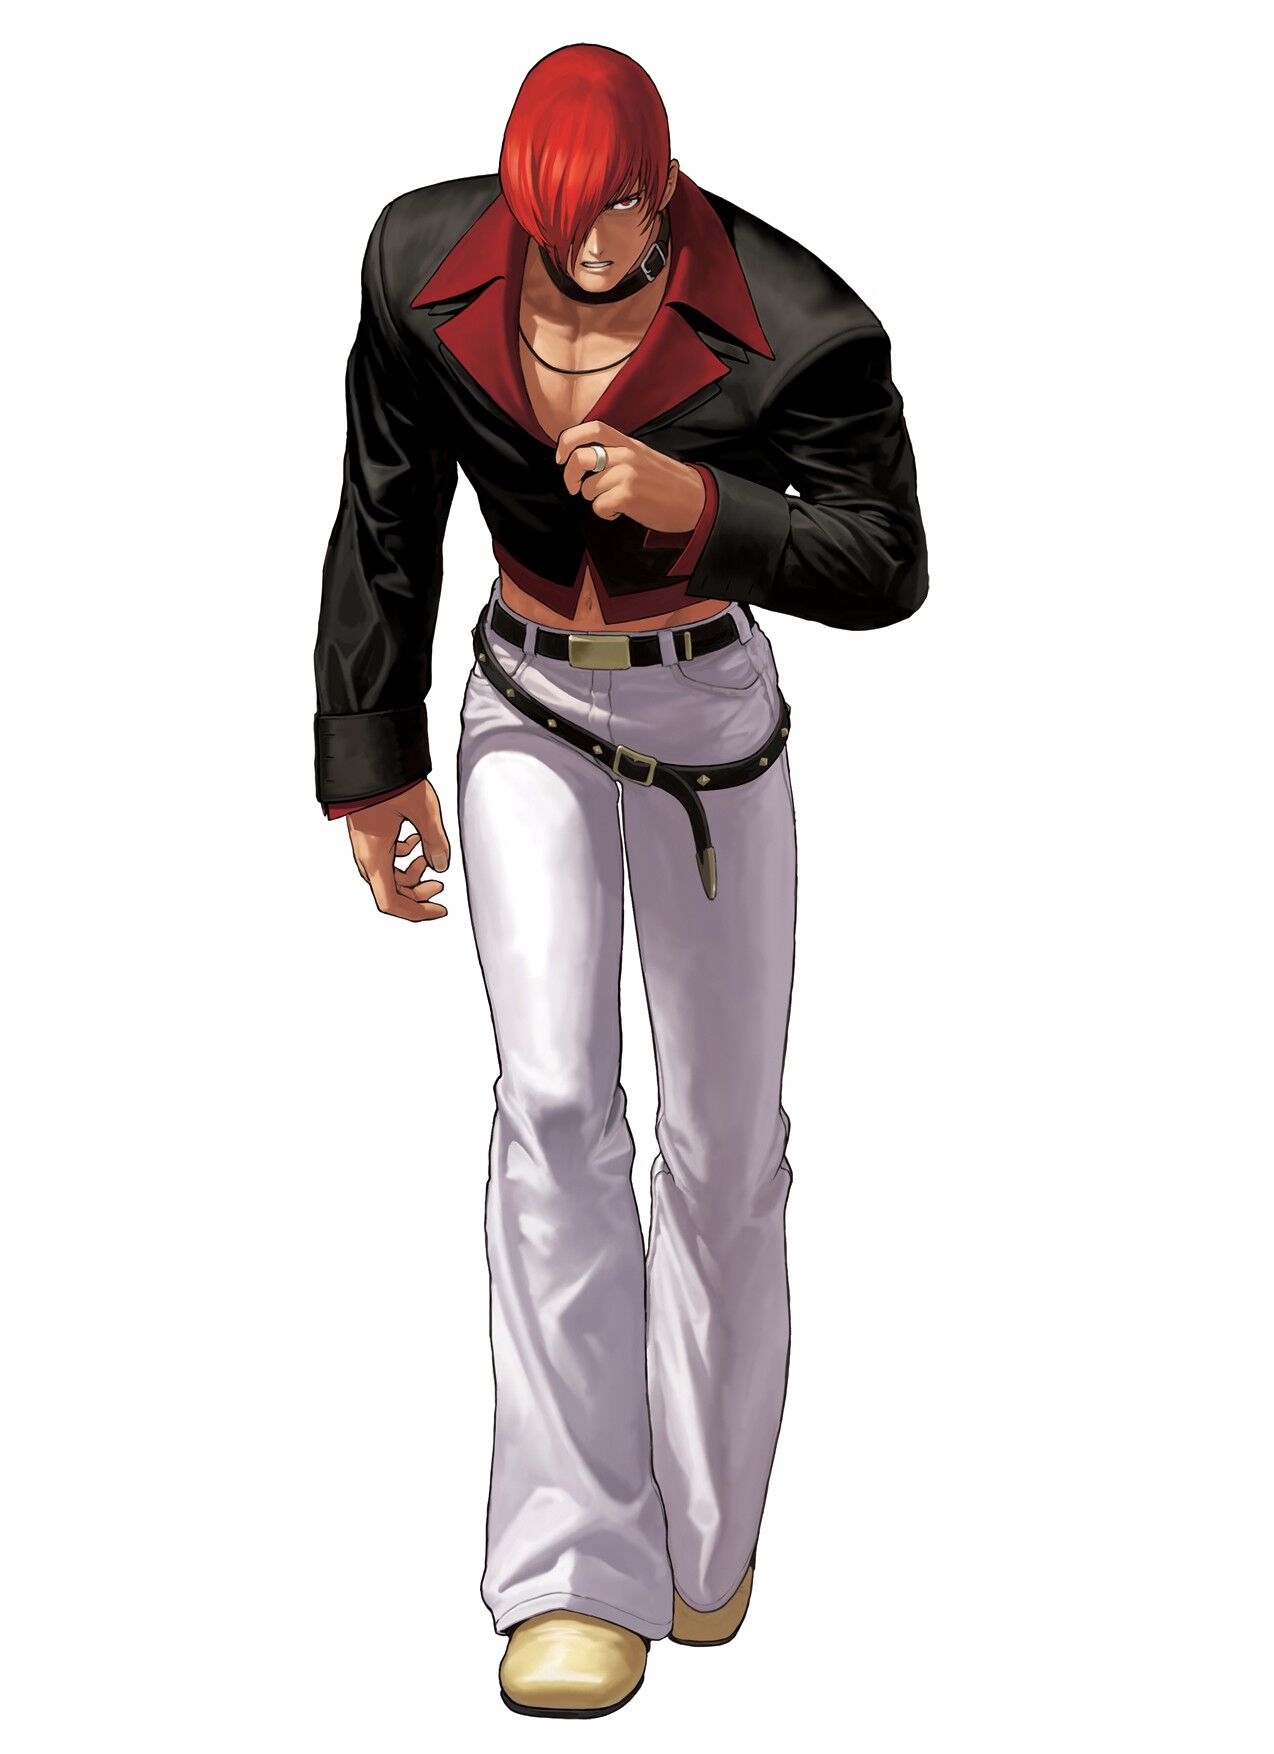 kingoffighter, The King of Fighters, original / IORI YAGAMI Quotes - pixiv